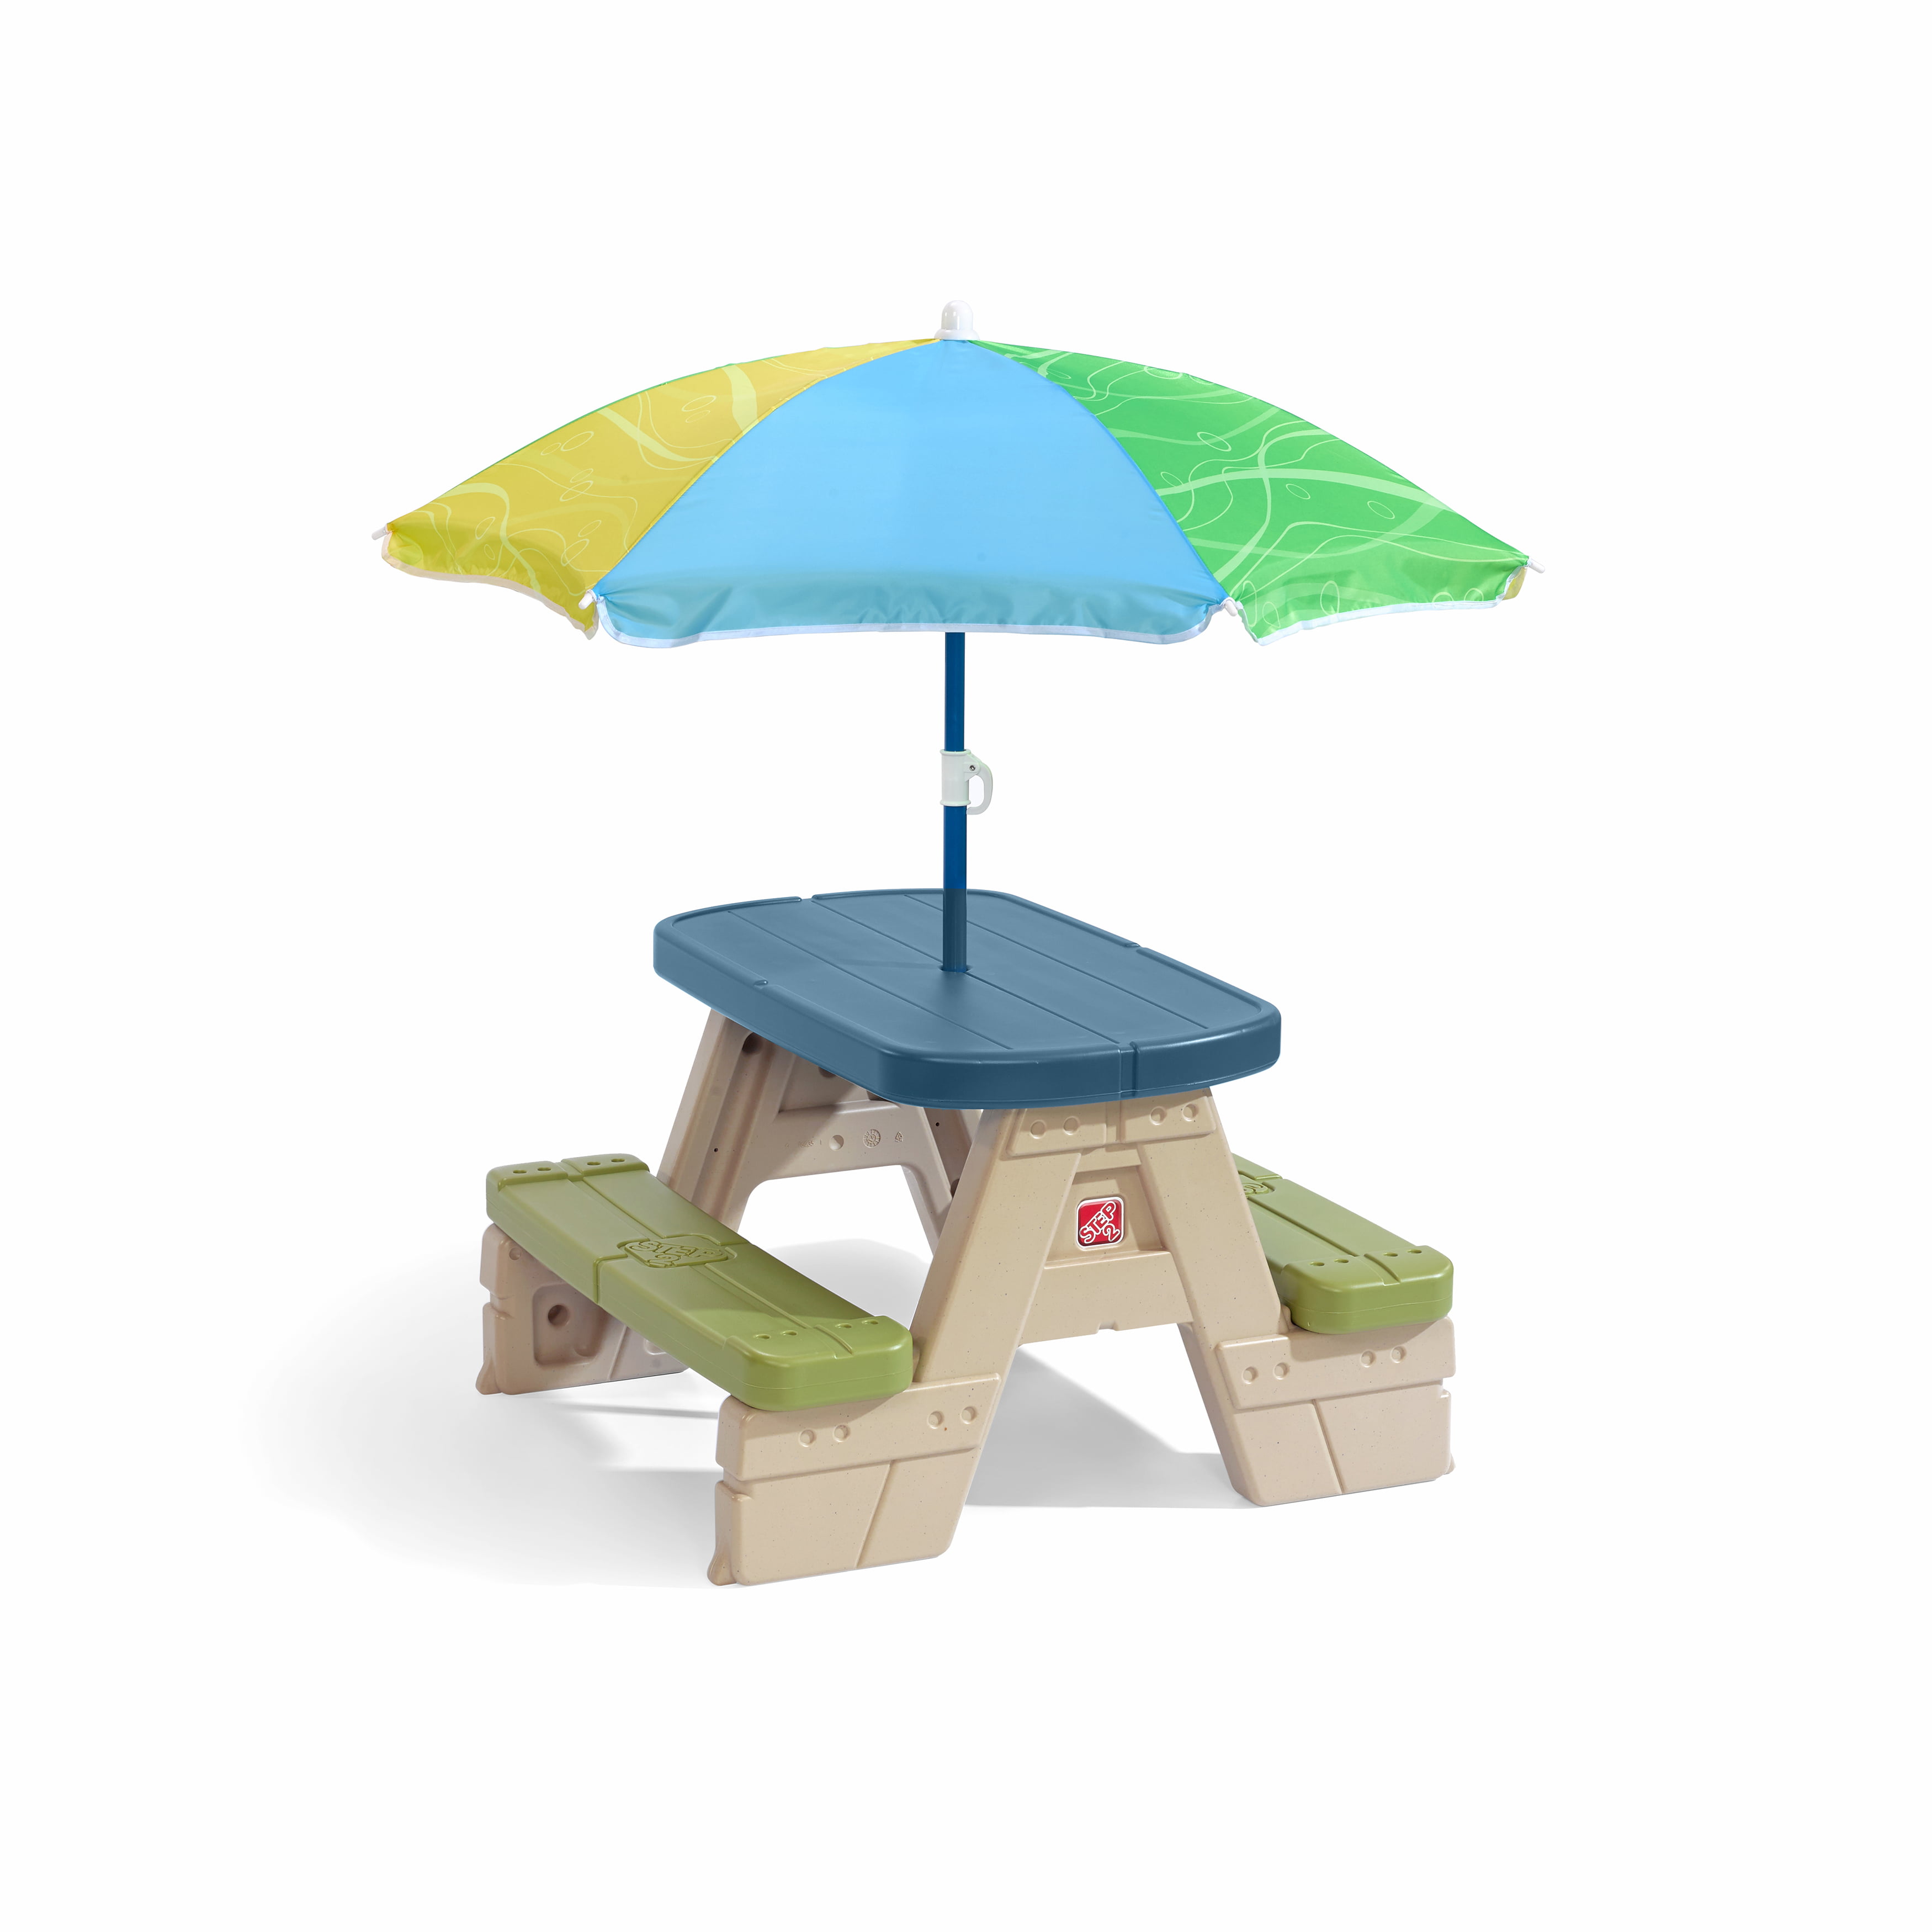 Picnic Table With Umbrella stock illustrations